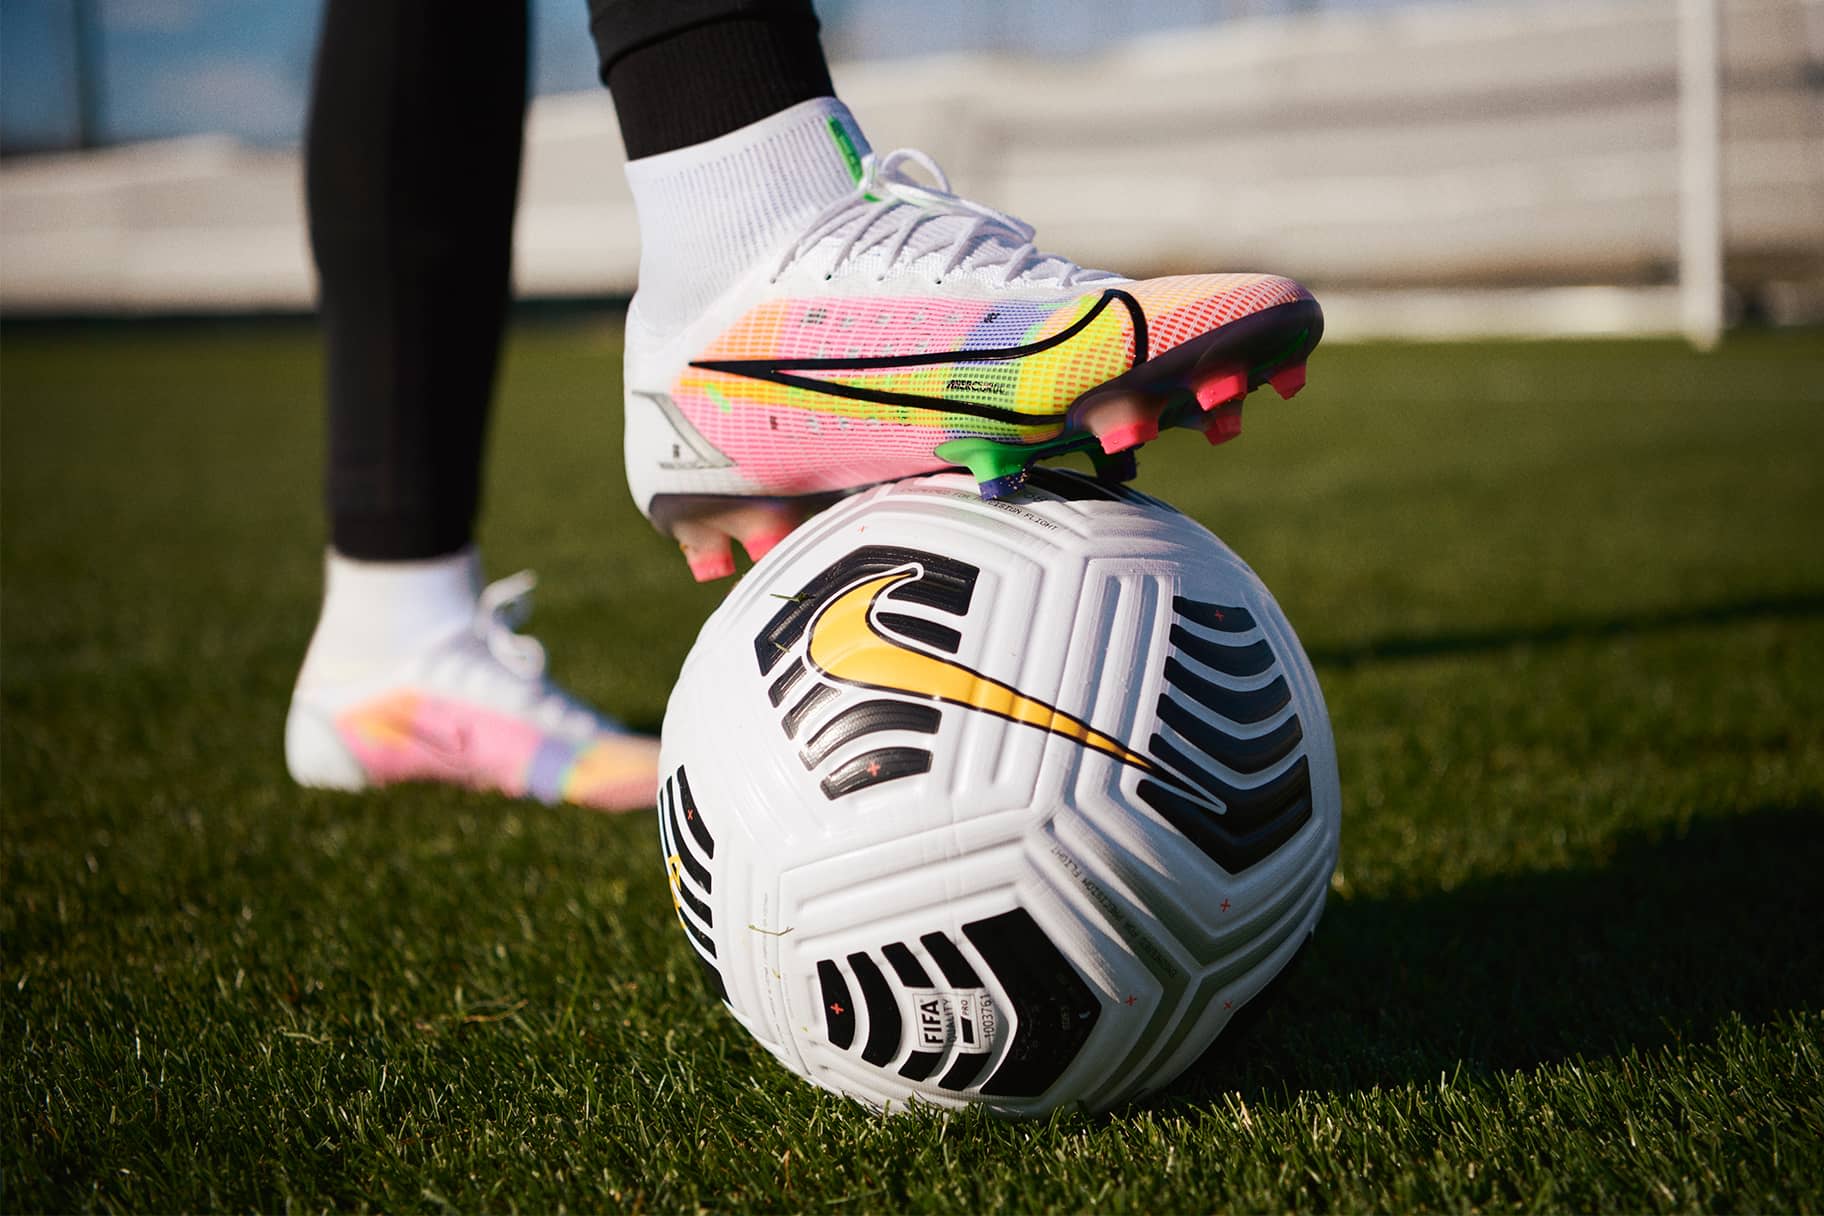 The Best Nike Football Boots to Match Your Playing Style